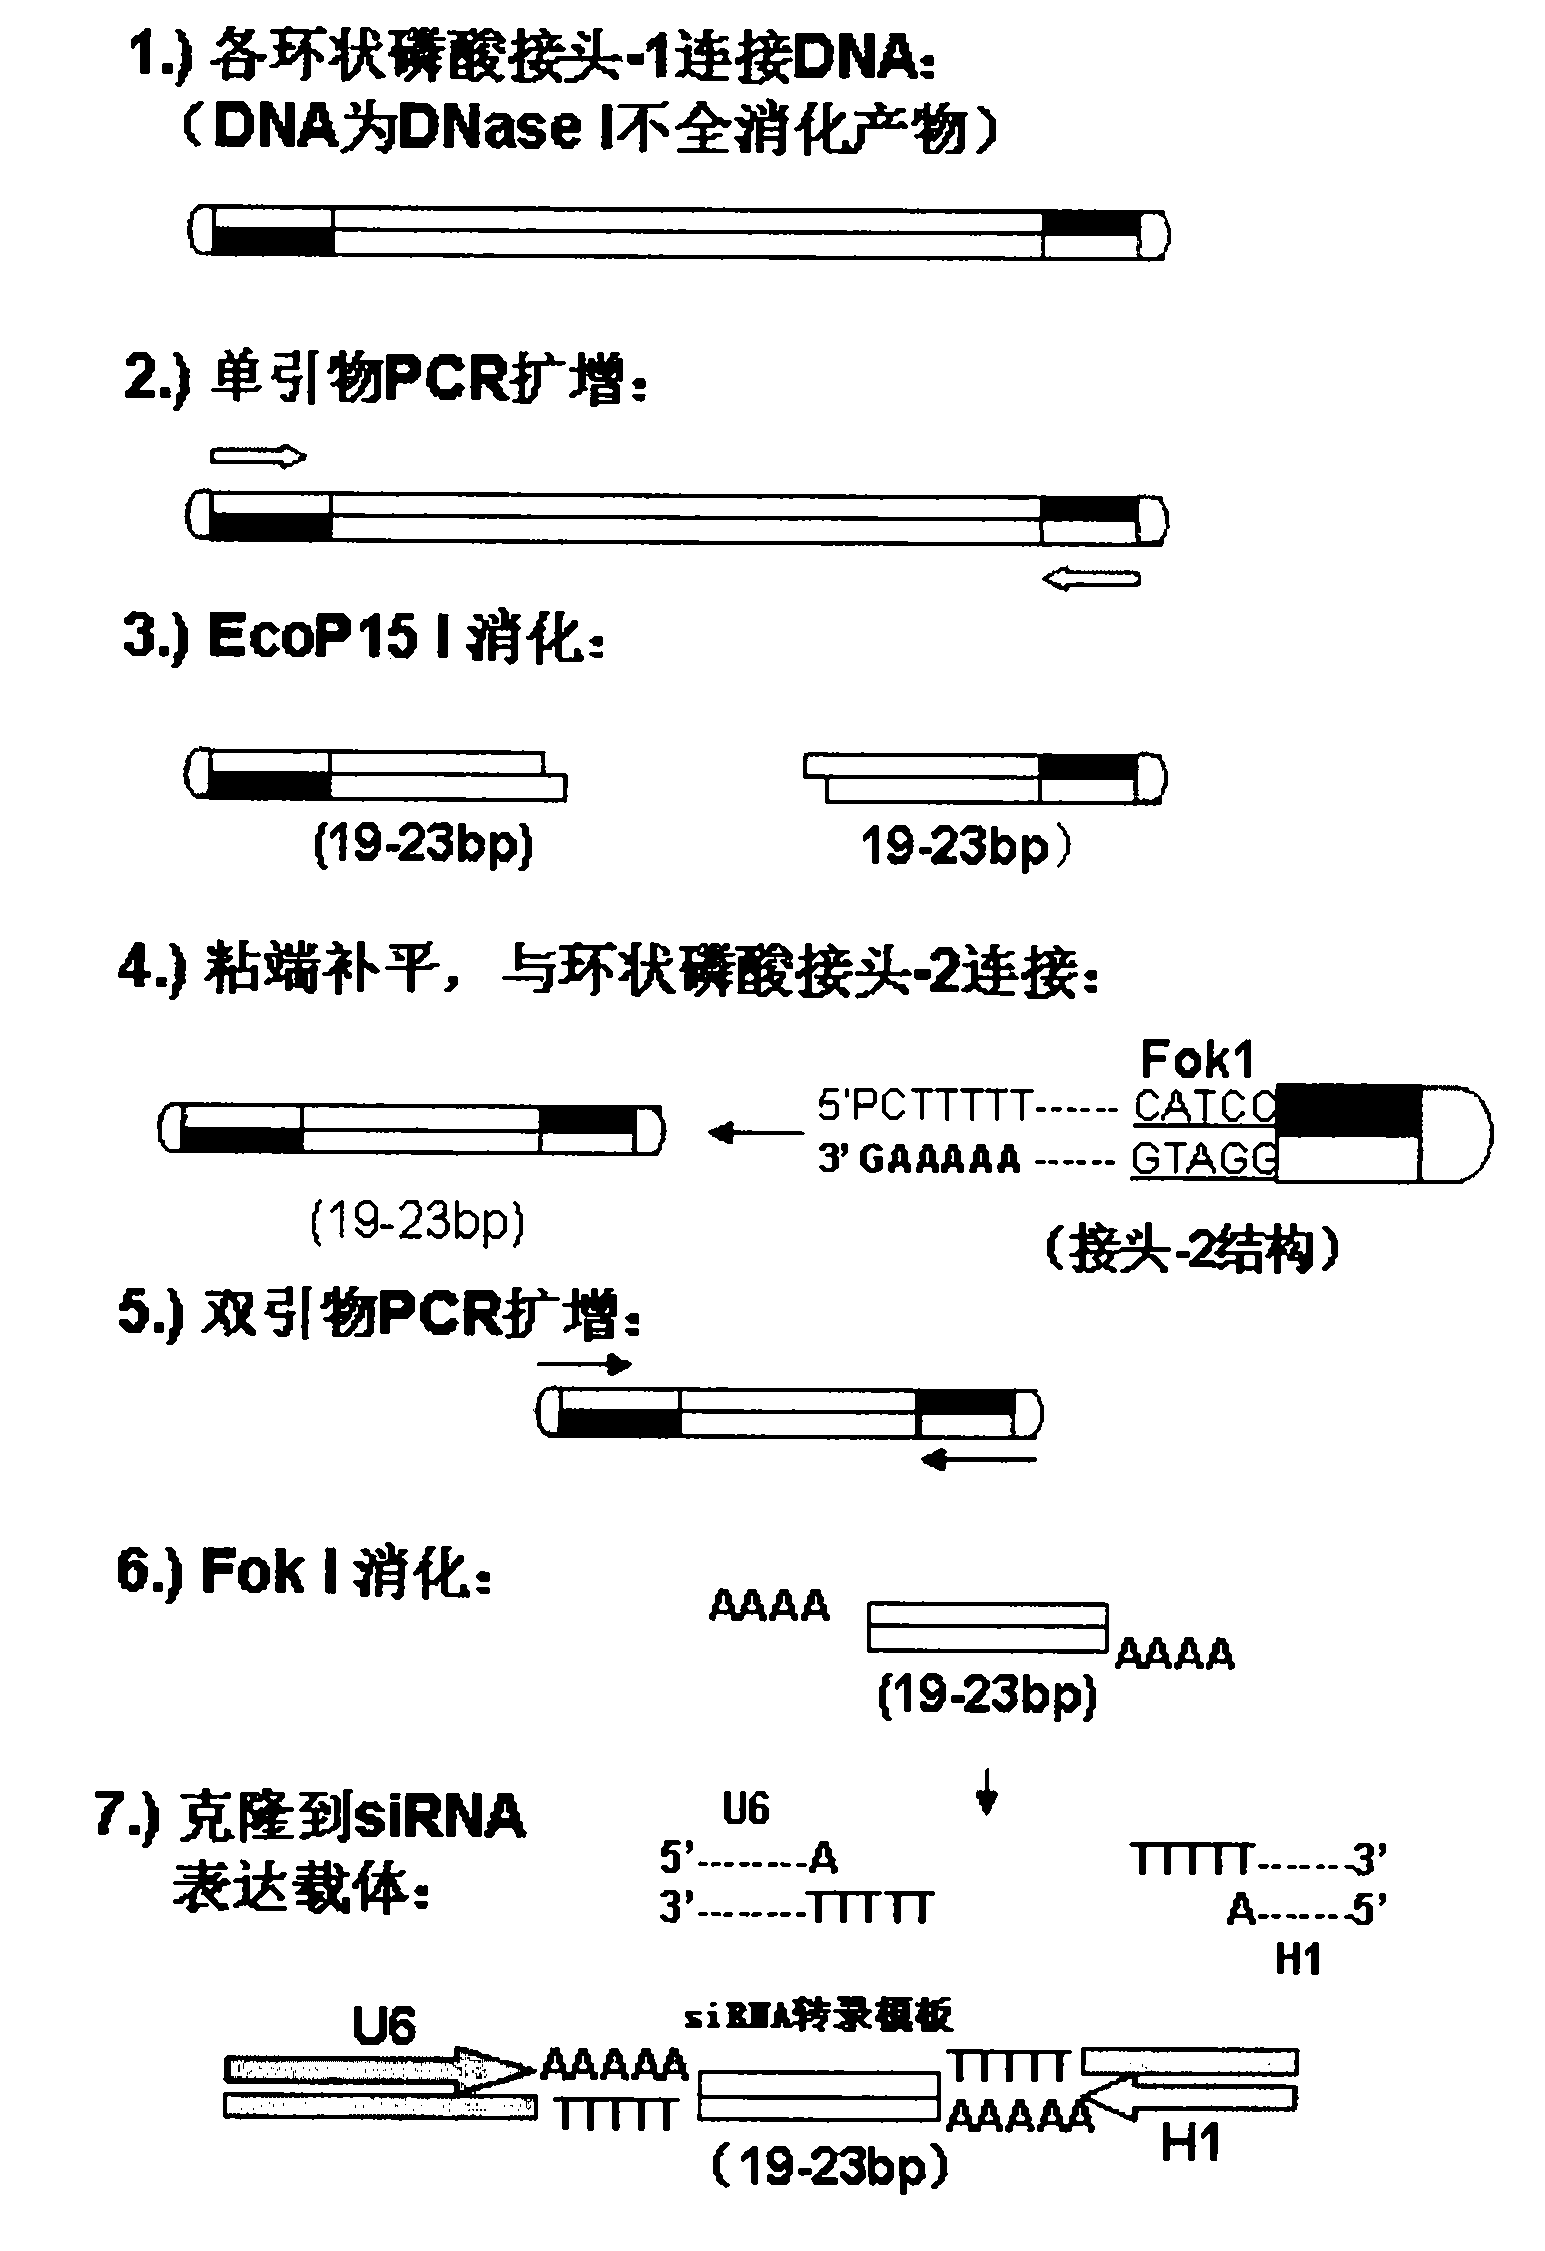 SiRNA (Small Interfering RNA) molecule capable of suppressing Survivin expression and application thereof